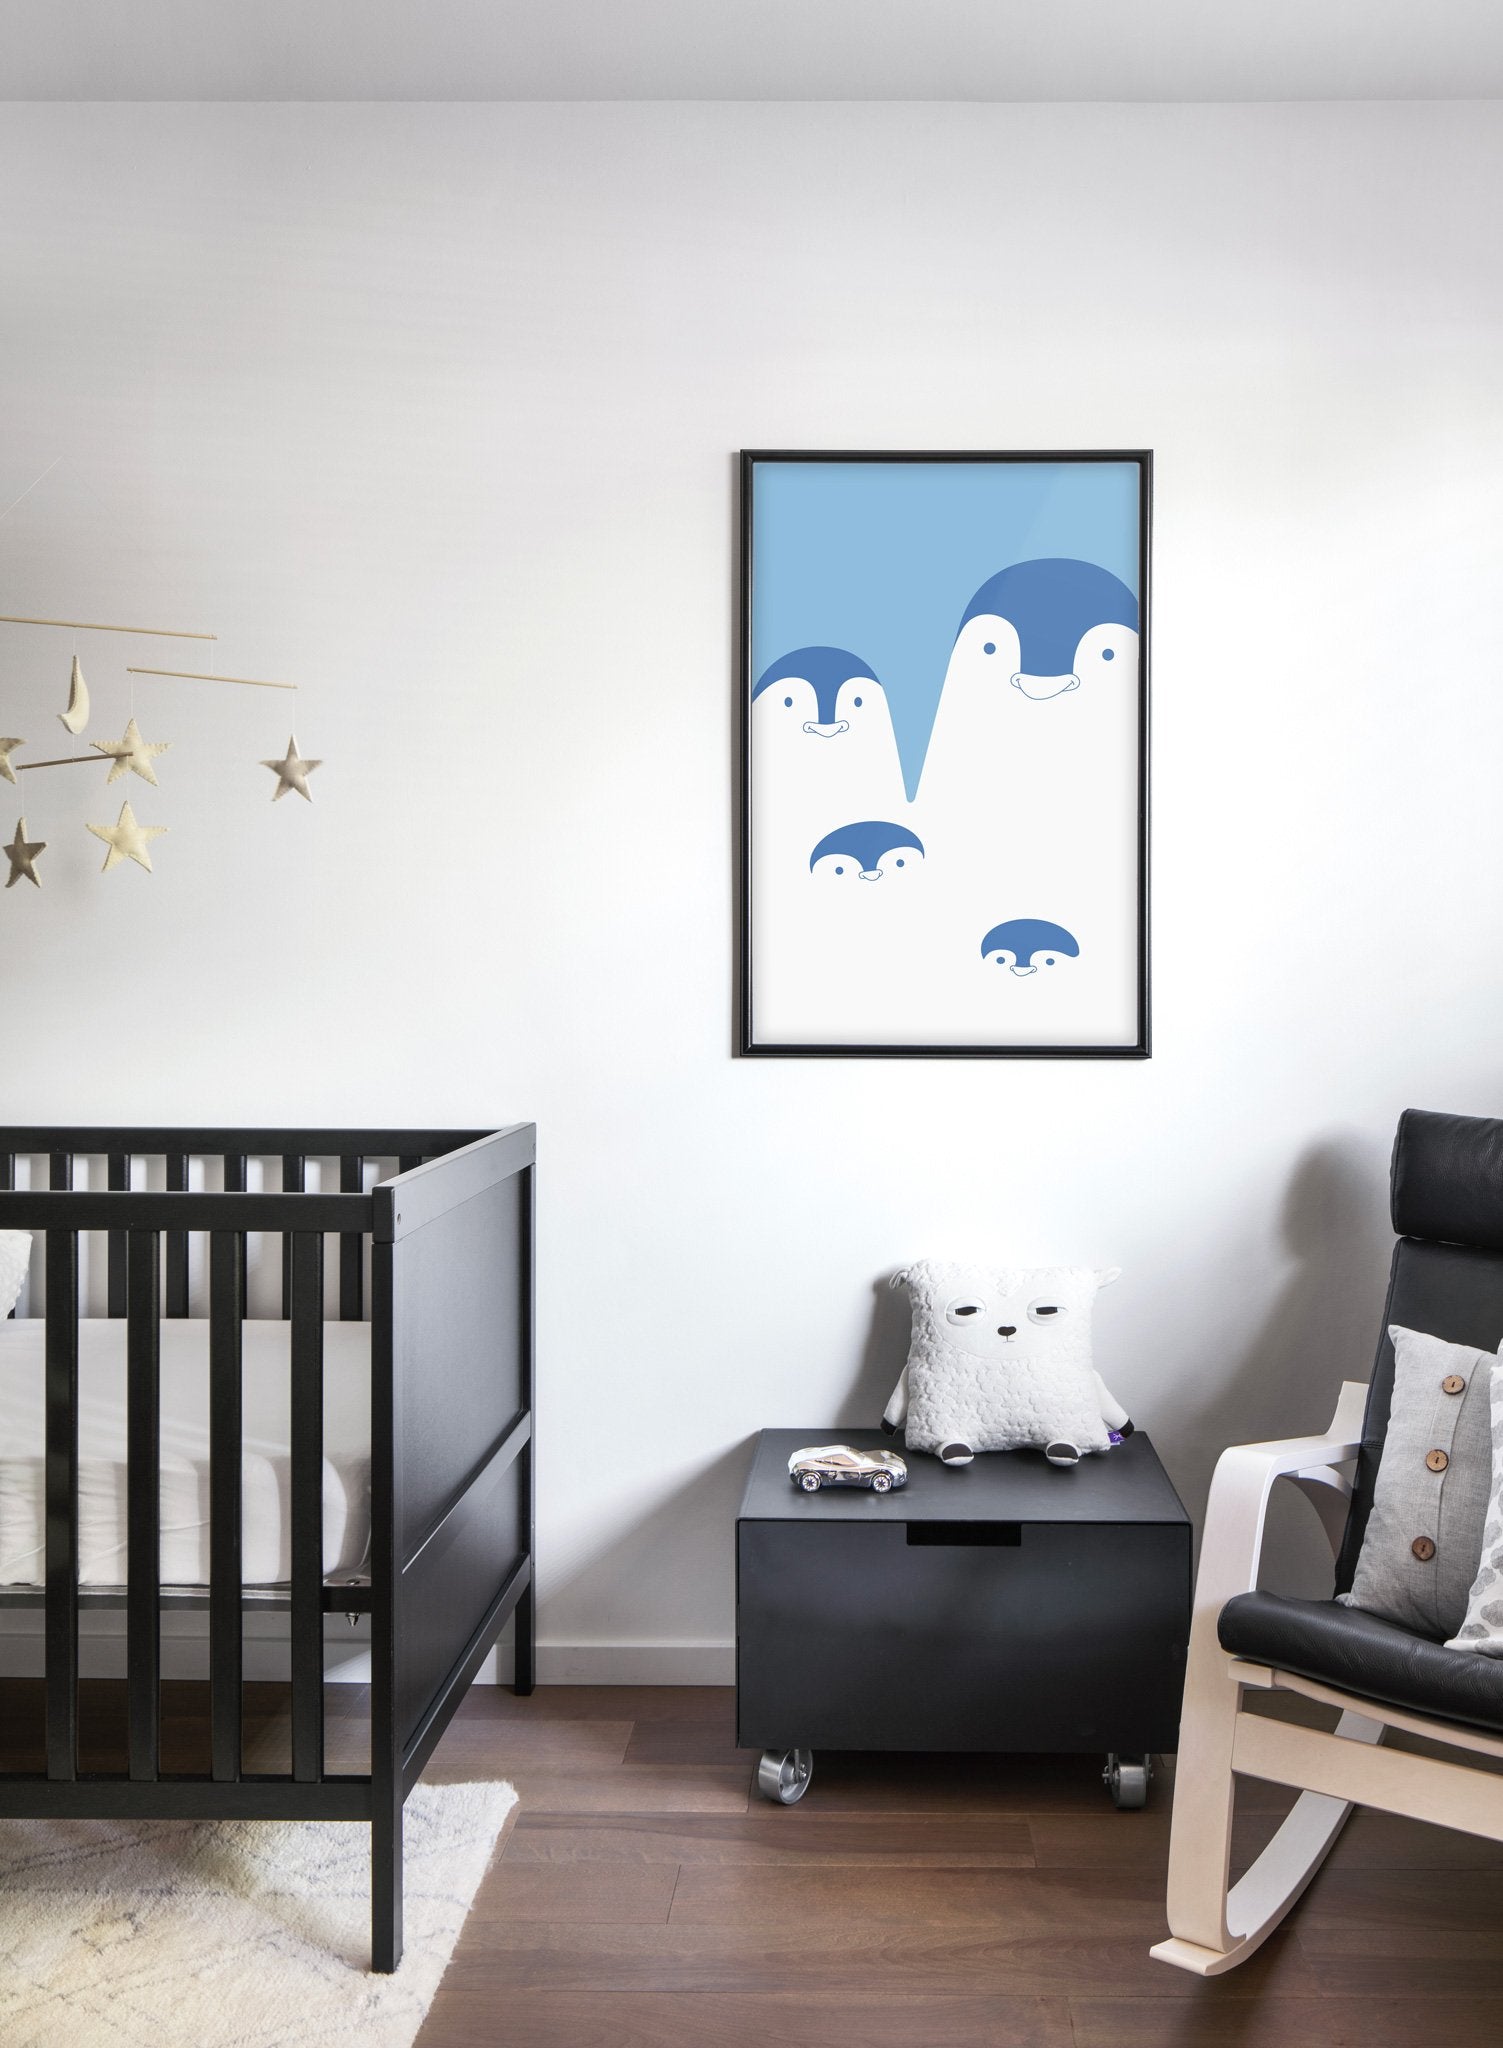 Modern minimalist poster by Opposite Wall with an illustration of a penguin family - kids collection - nursery